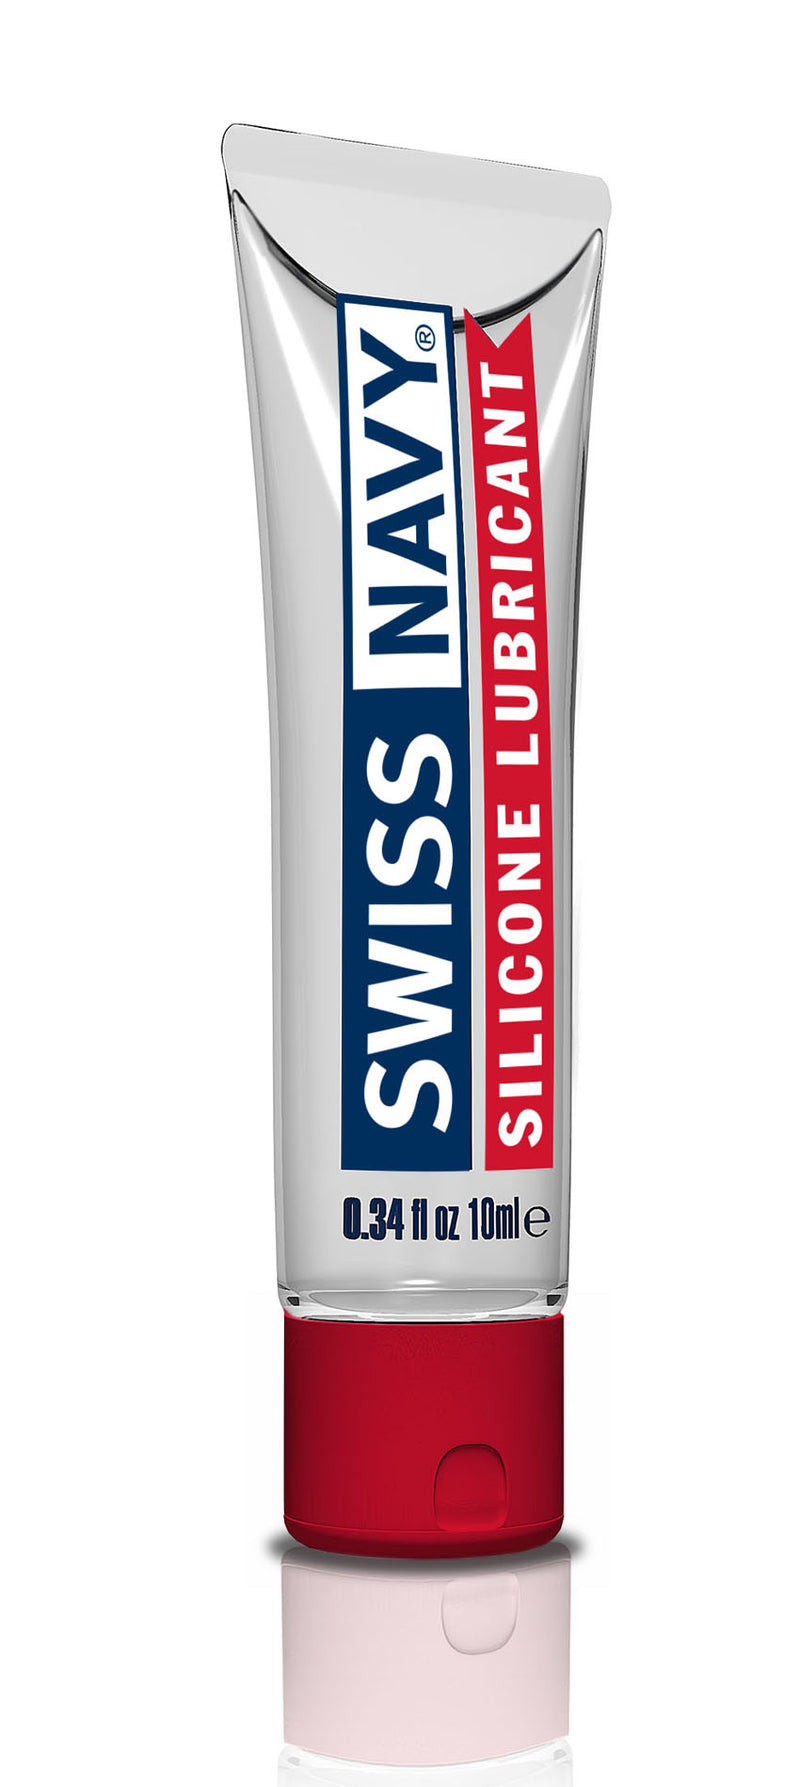 Swiss Navy Silicone Lubricant for Soft and Hydrated Tissues - Creams & Glides Collection for Ultimate Bedroom Fun!